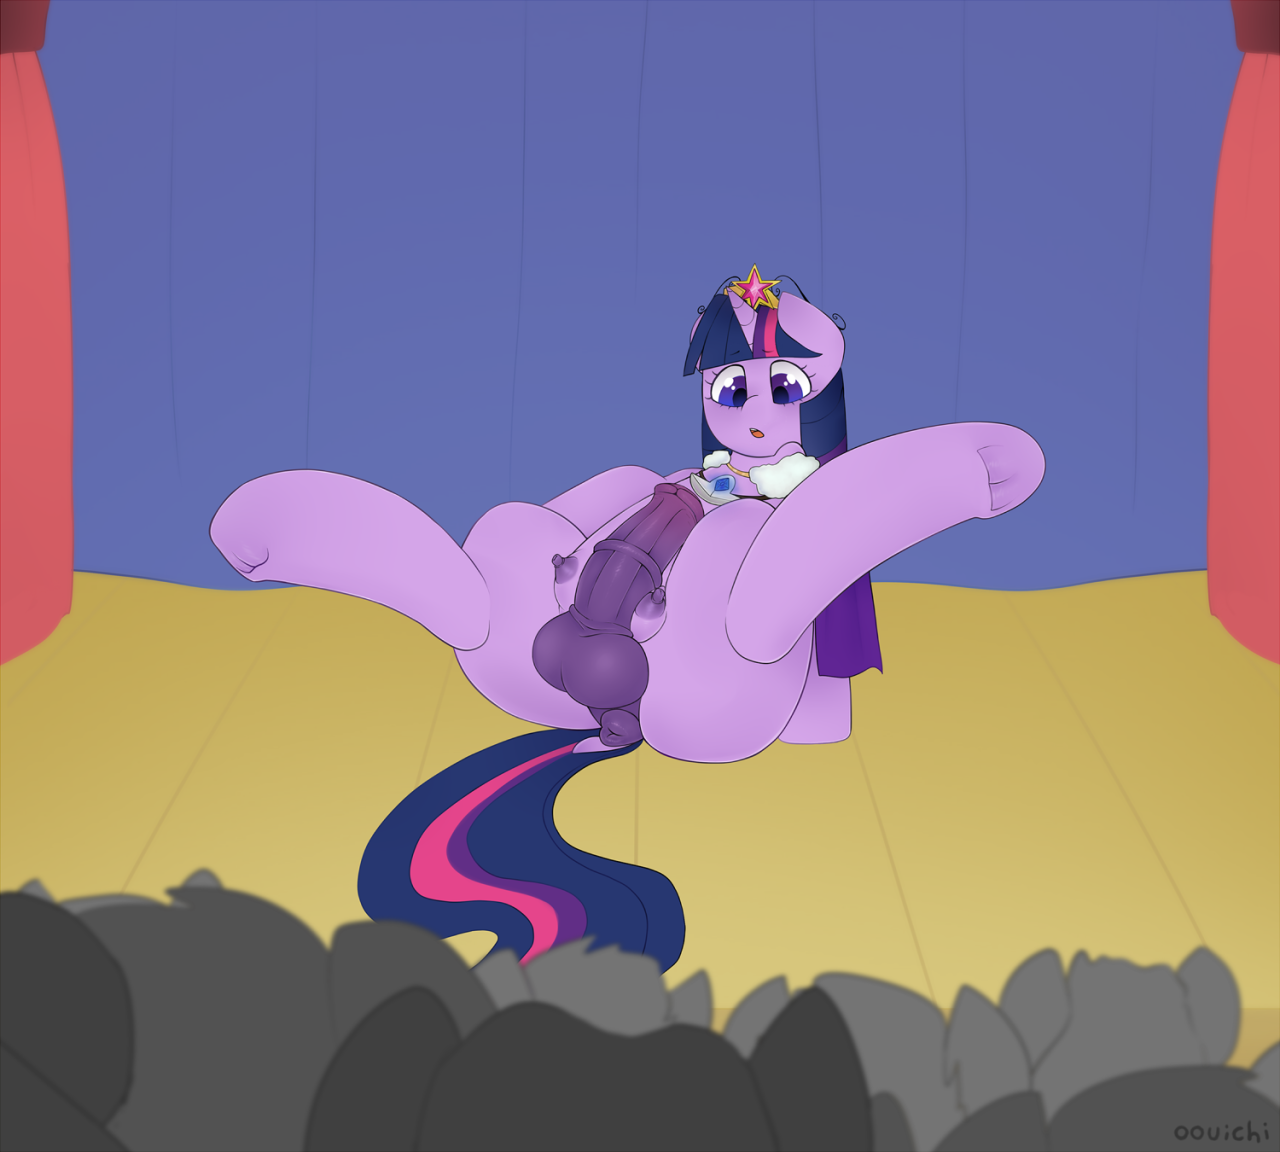 Twilight won a magical amulet in a battle against Trixie, and is now reaping the